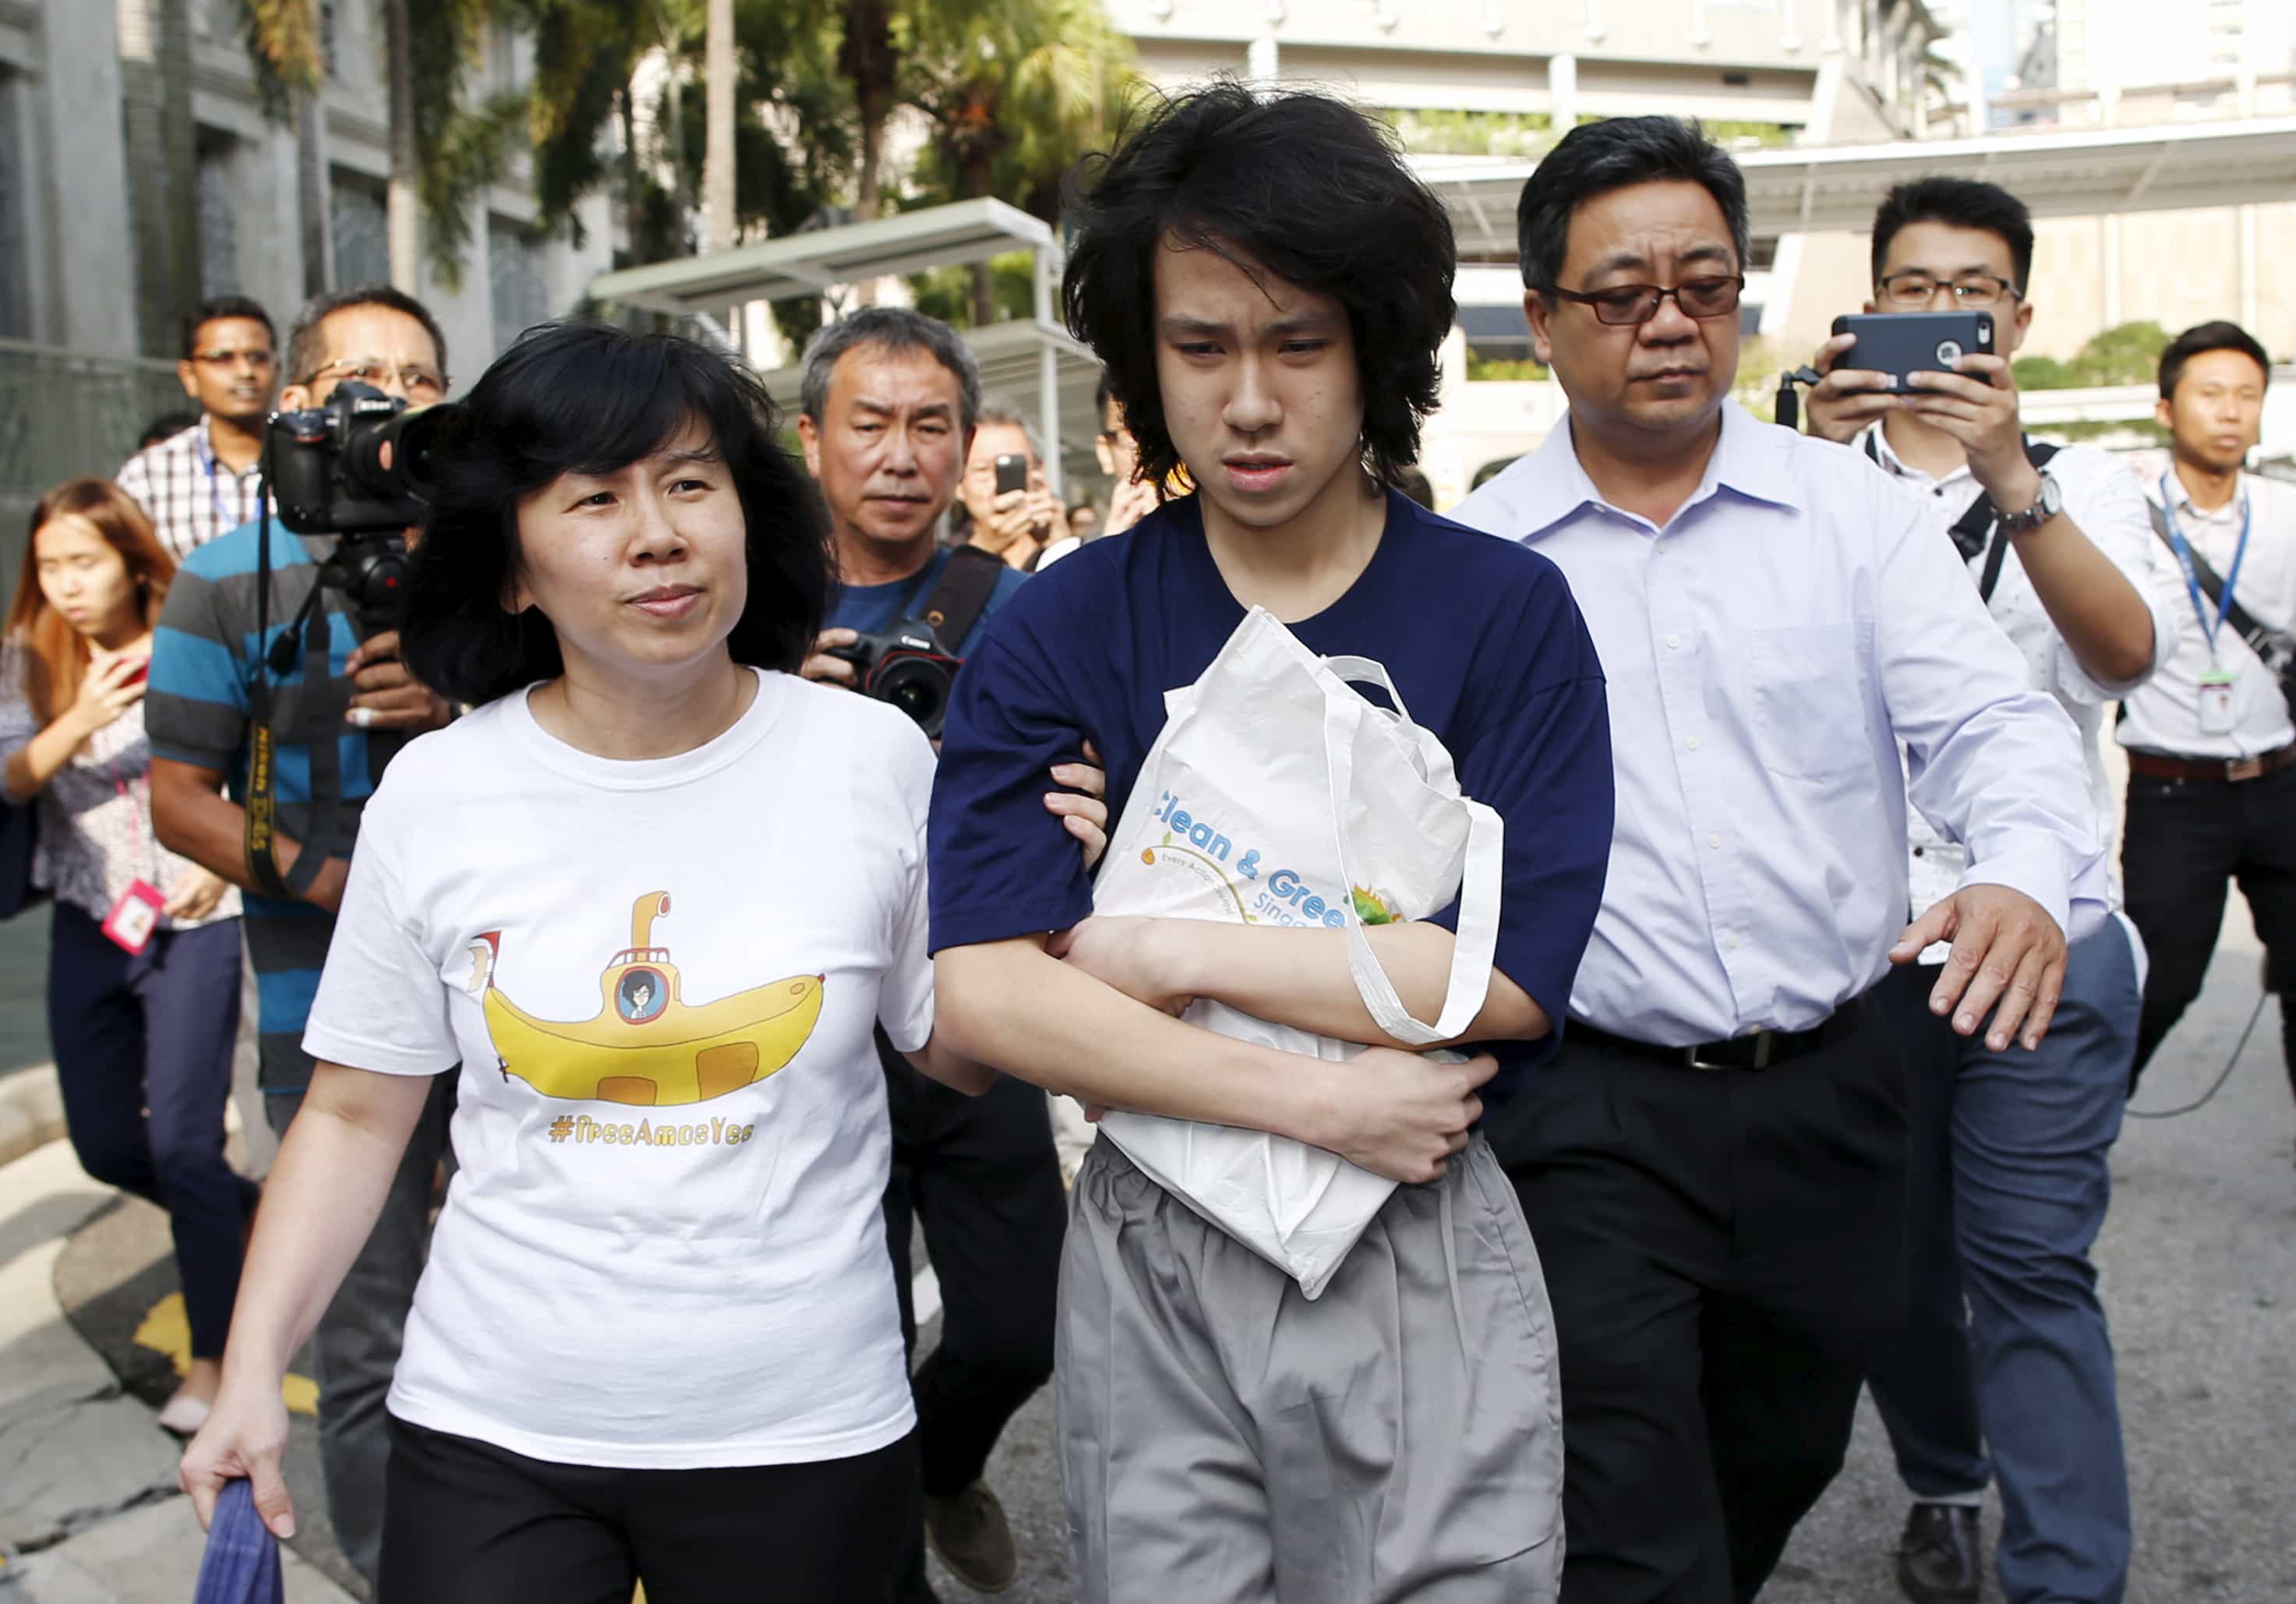 Teen blogger Amos Yee leaves with his parents after his sentencing from the State Court in Singapore on 6 July 2015, REUTERS/Edgar Su